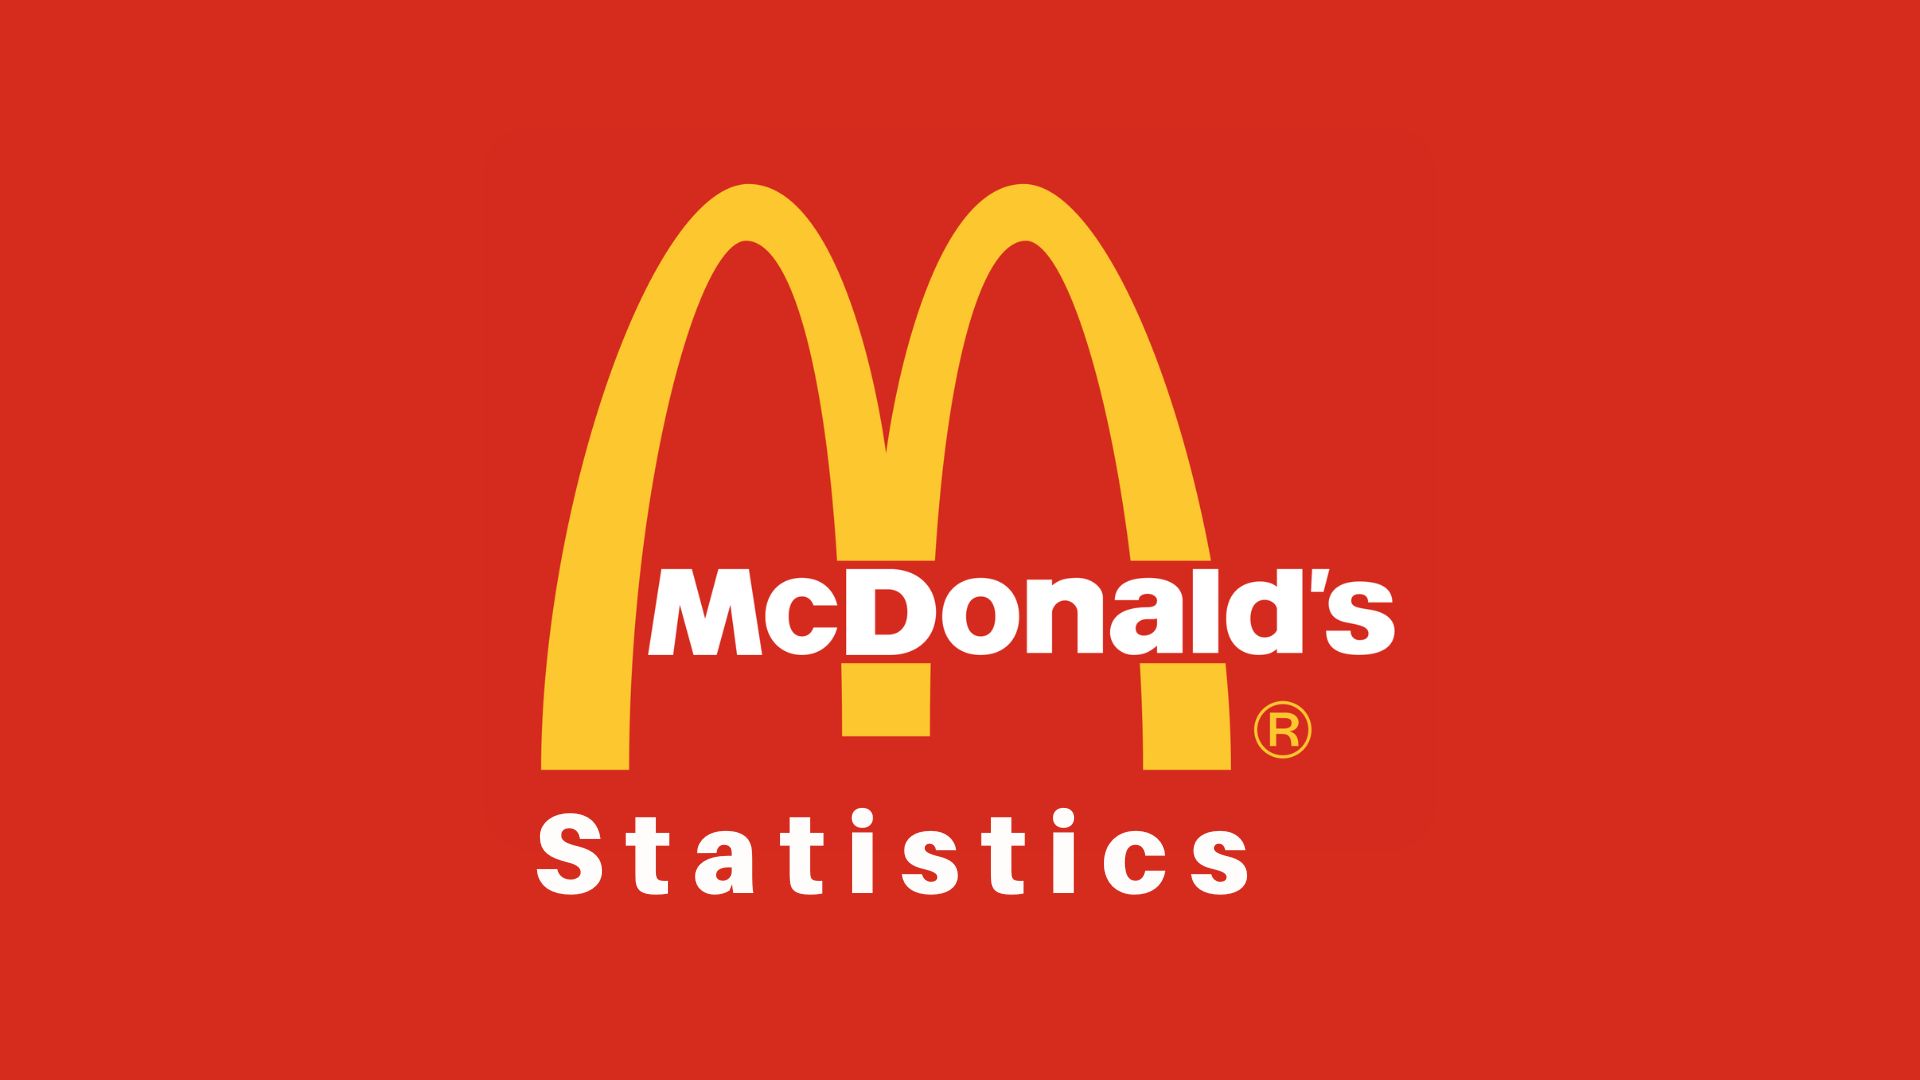 McDonald’s Statistics – By Demographic, Country, Locations, Revenue, and Food